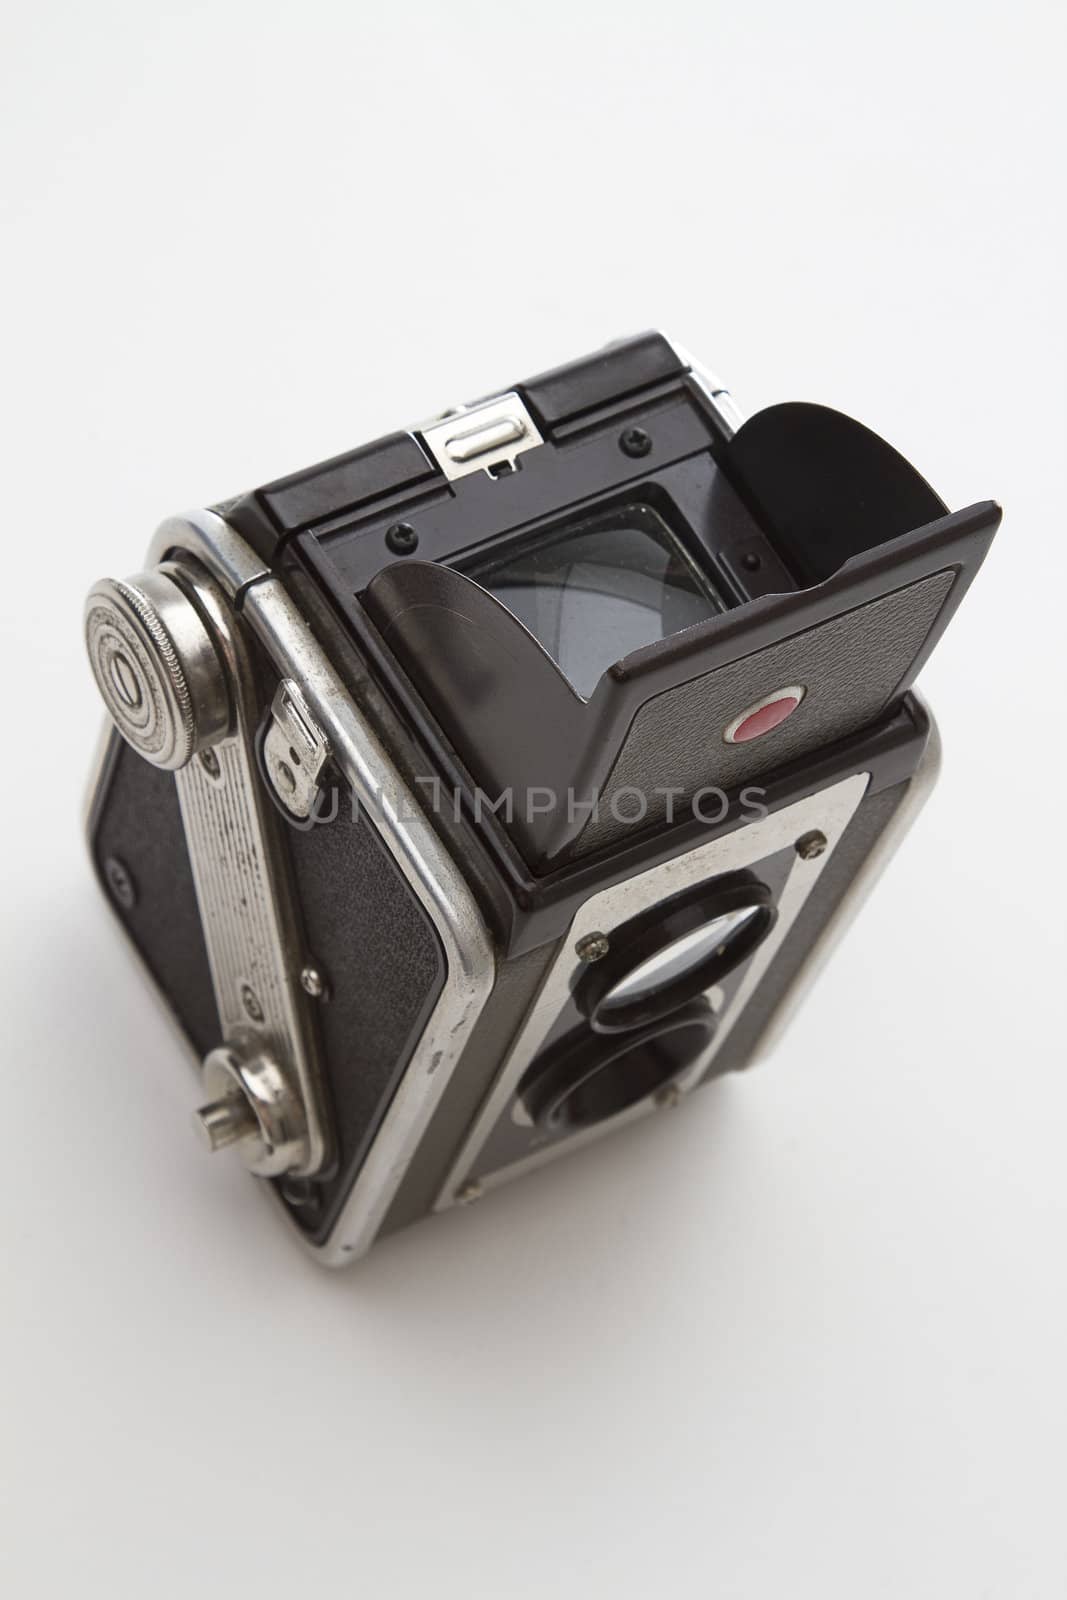 Old medium format from the 50's use by amateur photographer with viewer door open